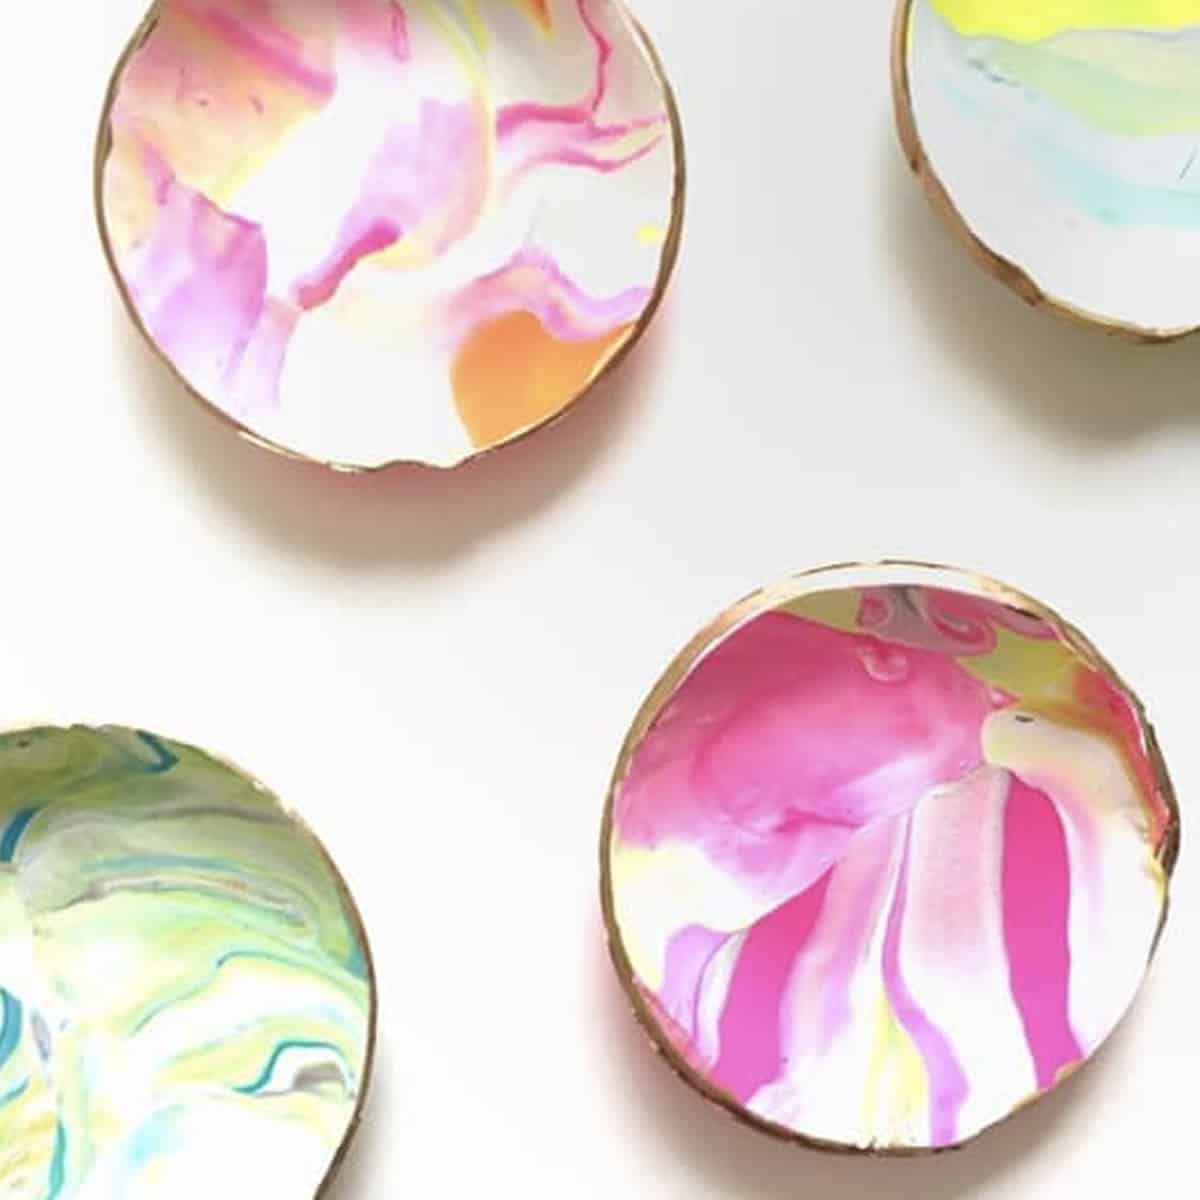 Finished marbled clay ring dishes